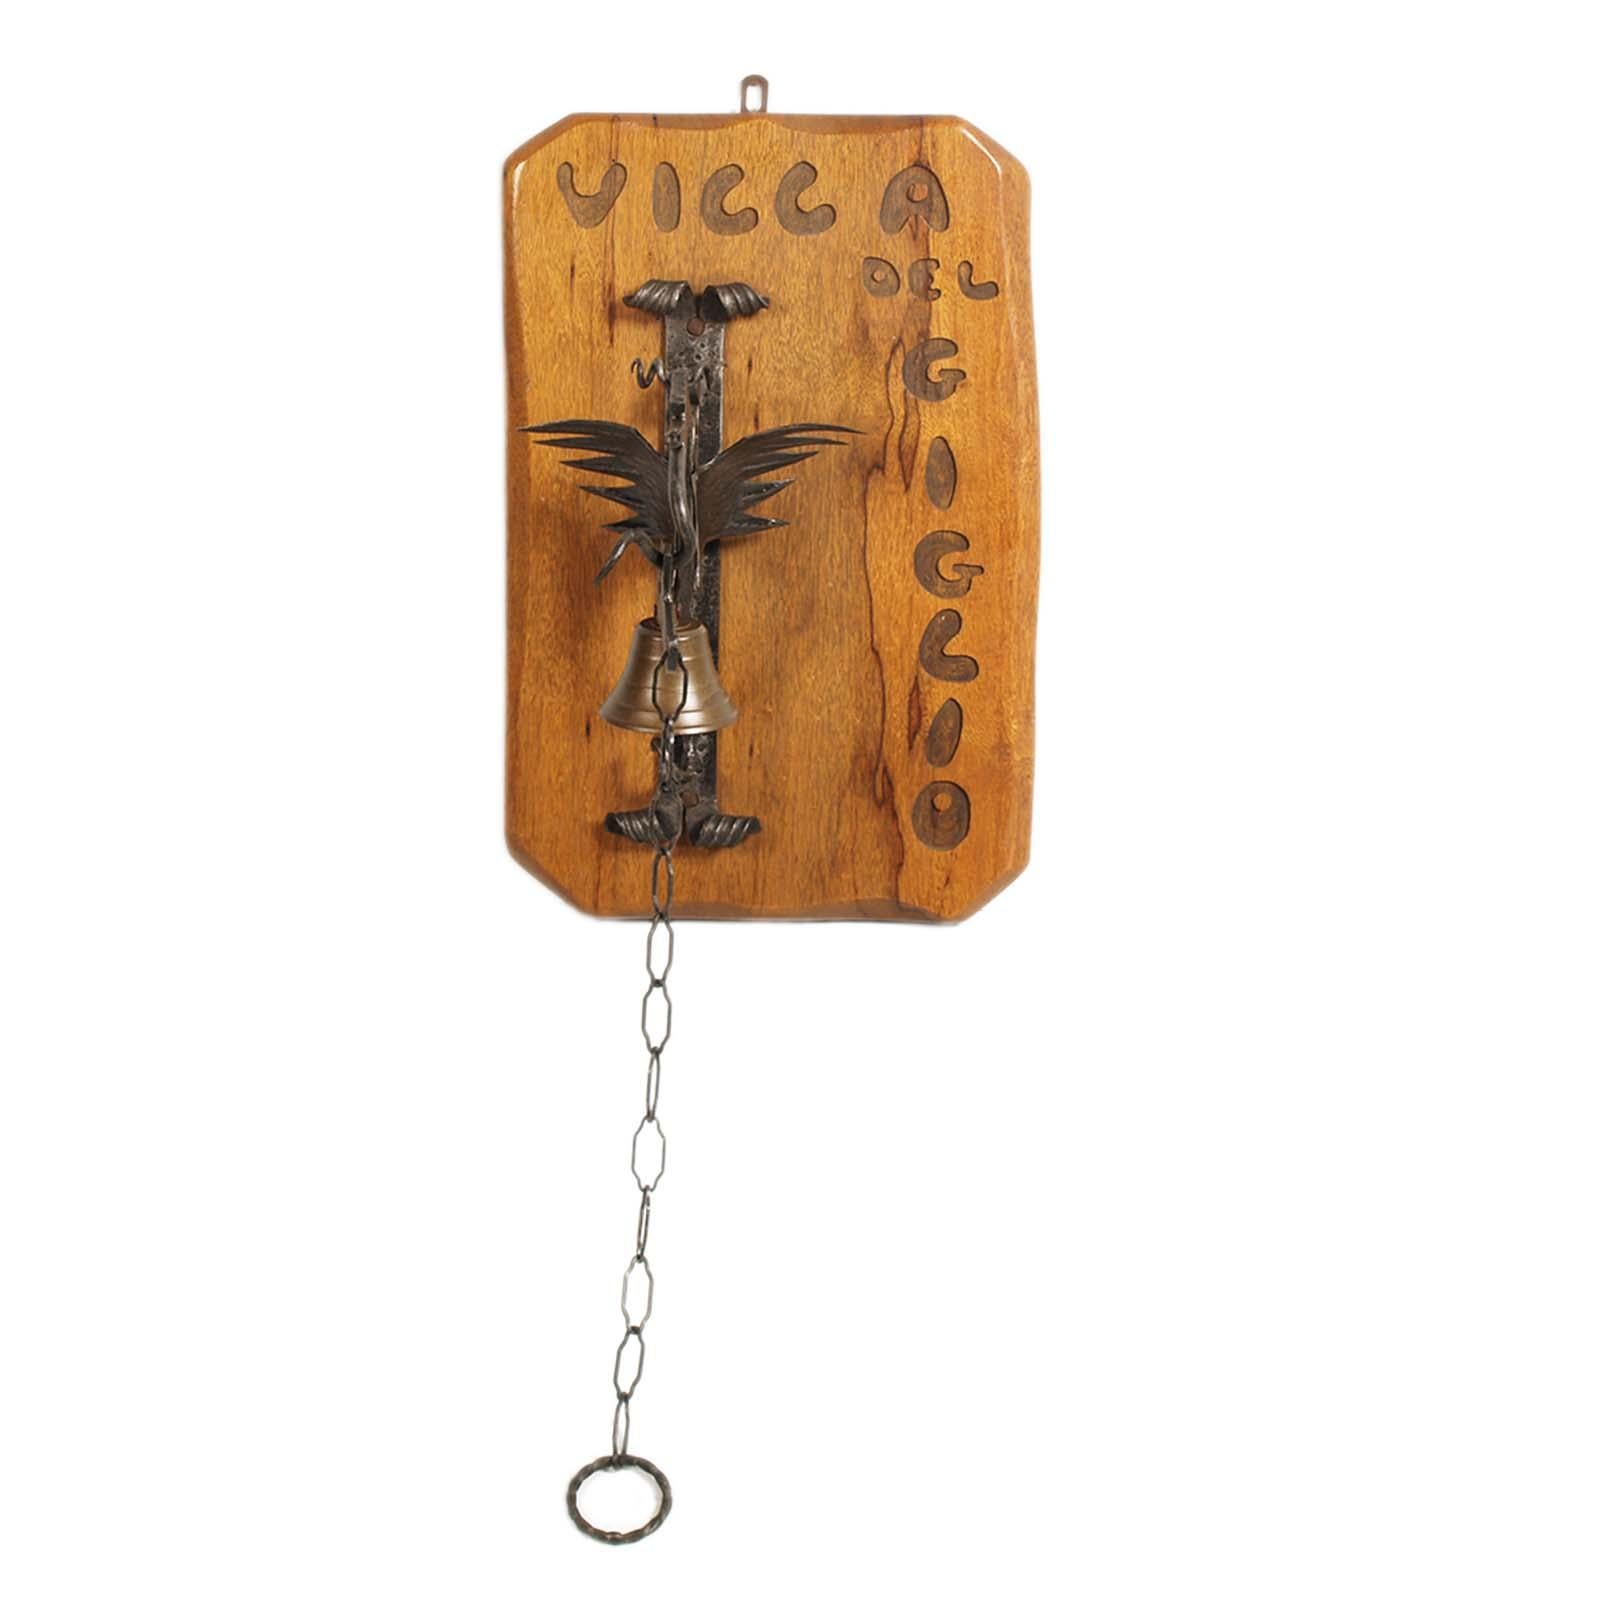 Manual entrance bell in wrought iron, Tyrolean craftsmanship from 1950
The wrought iron structure is a classic stylized dragon figure, very common in the Austrian Alto Torolo area.

We wax polished the wooden support, bringing it back to its best